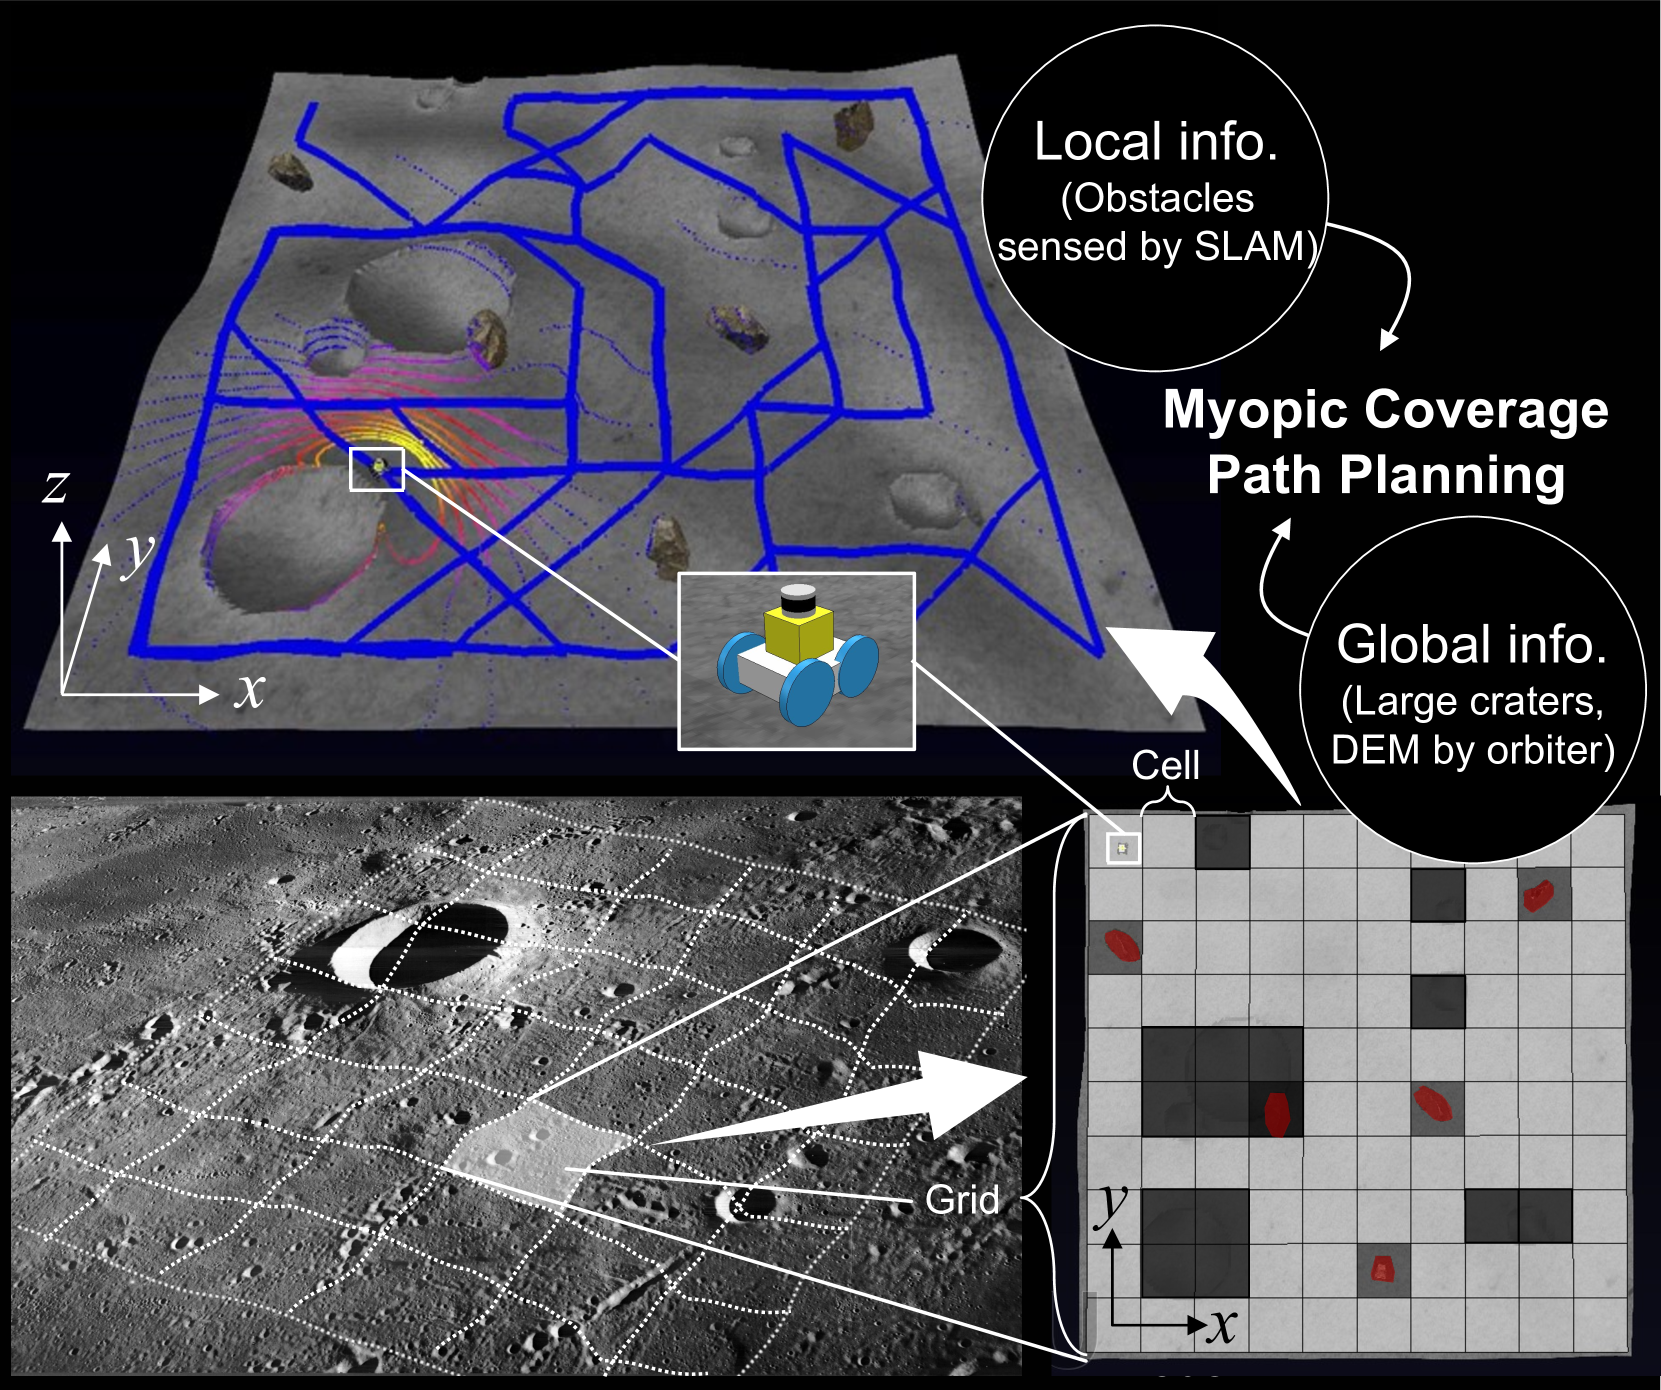 Risk-Aware Coverage Path Planning for Lunar Micro-Rovers Leveraging Global and Local Environmental Data